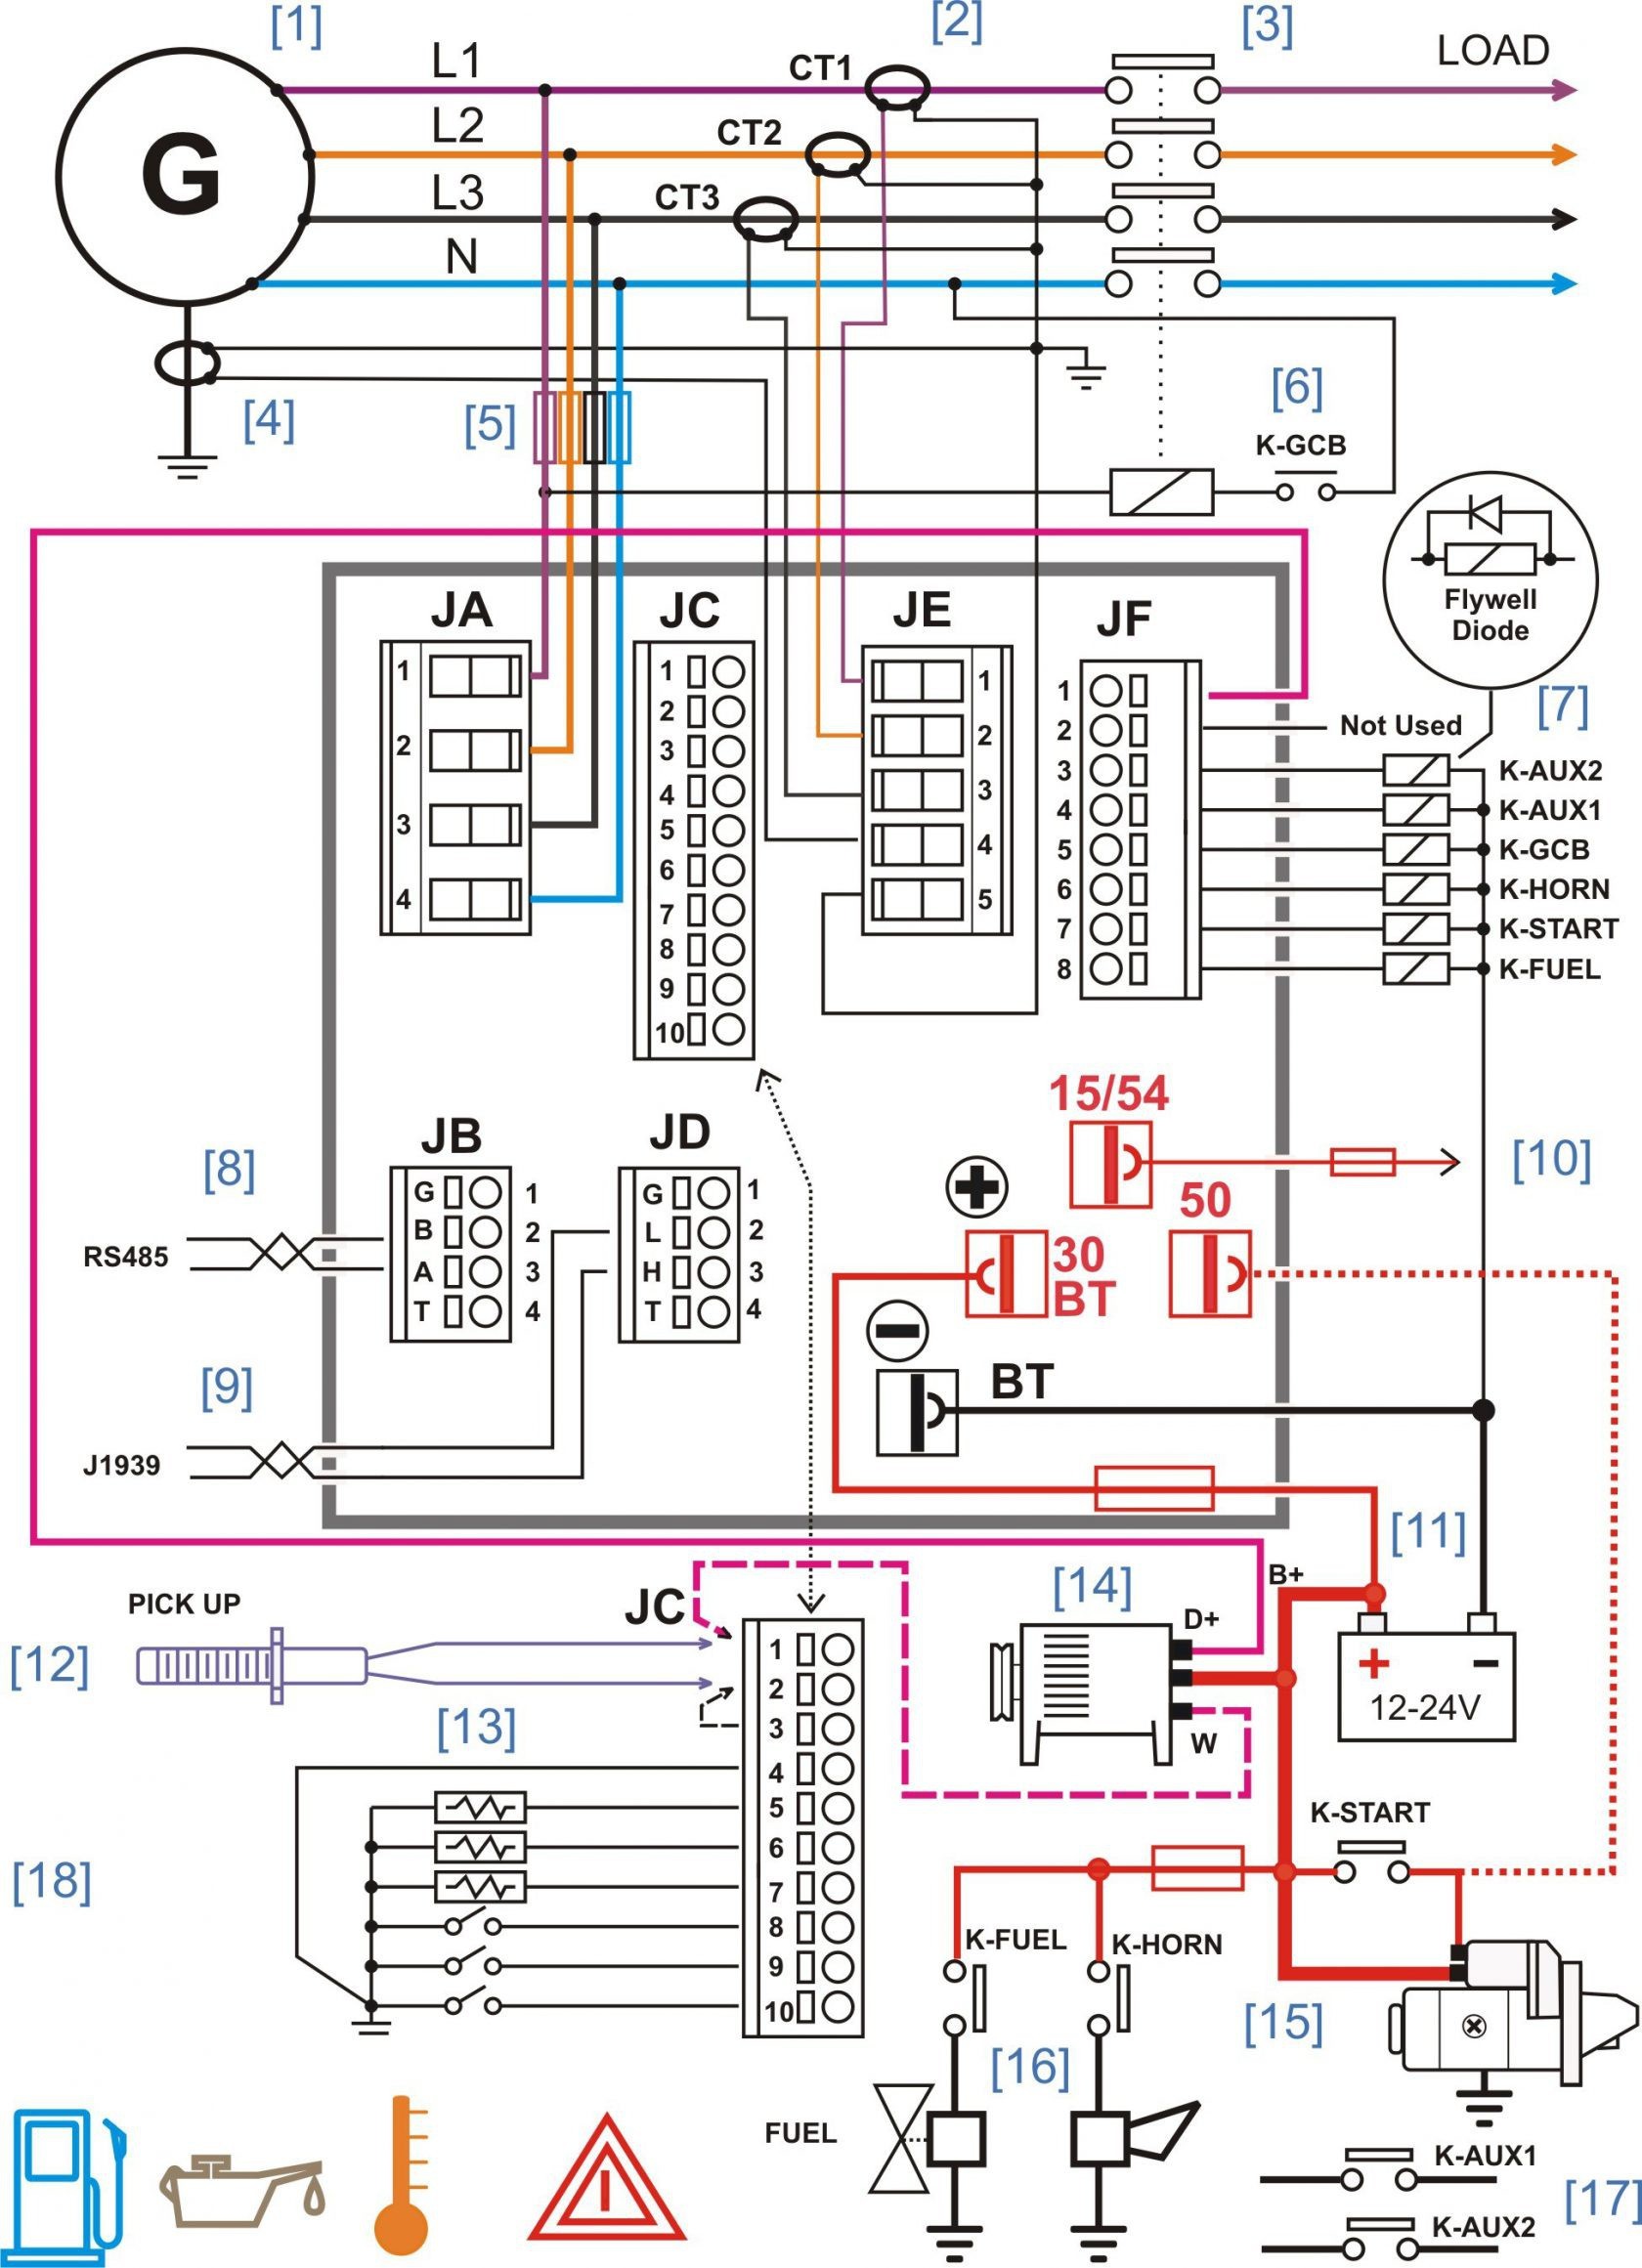 Diagram Electrical Circuit Fresh 30 Amp Rv Wiring Diagram Unique Delighted Delco Stereo Wiring